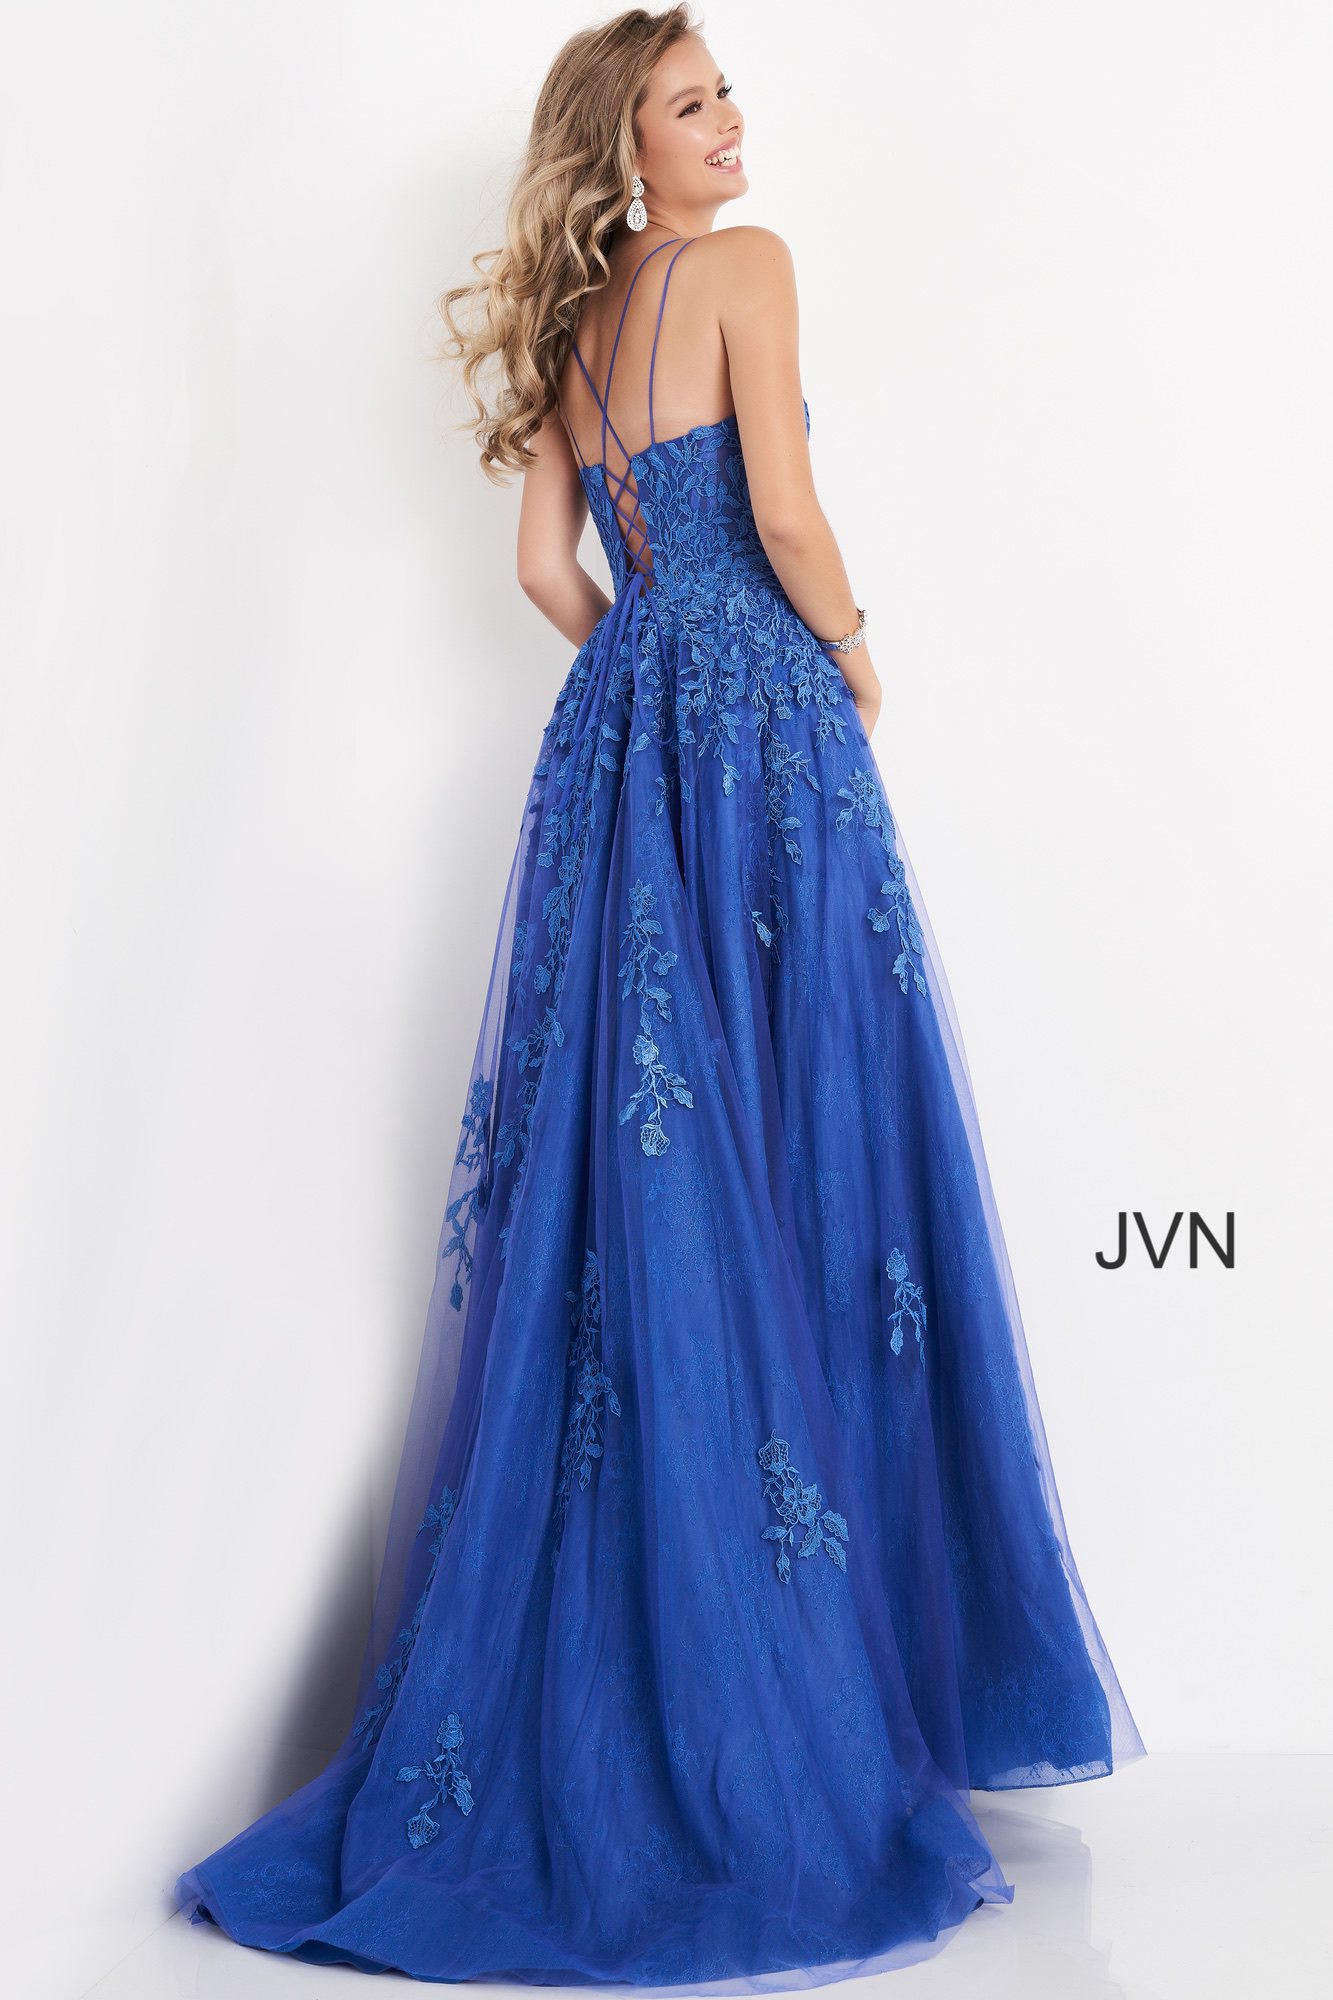 JVN06644 | Royal Tie Back Embroidered Prom Ballgown